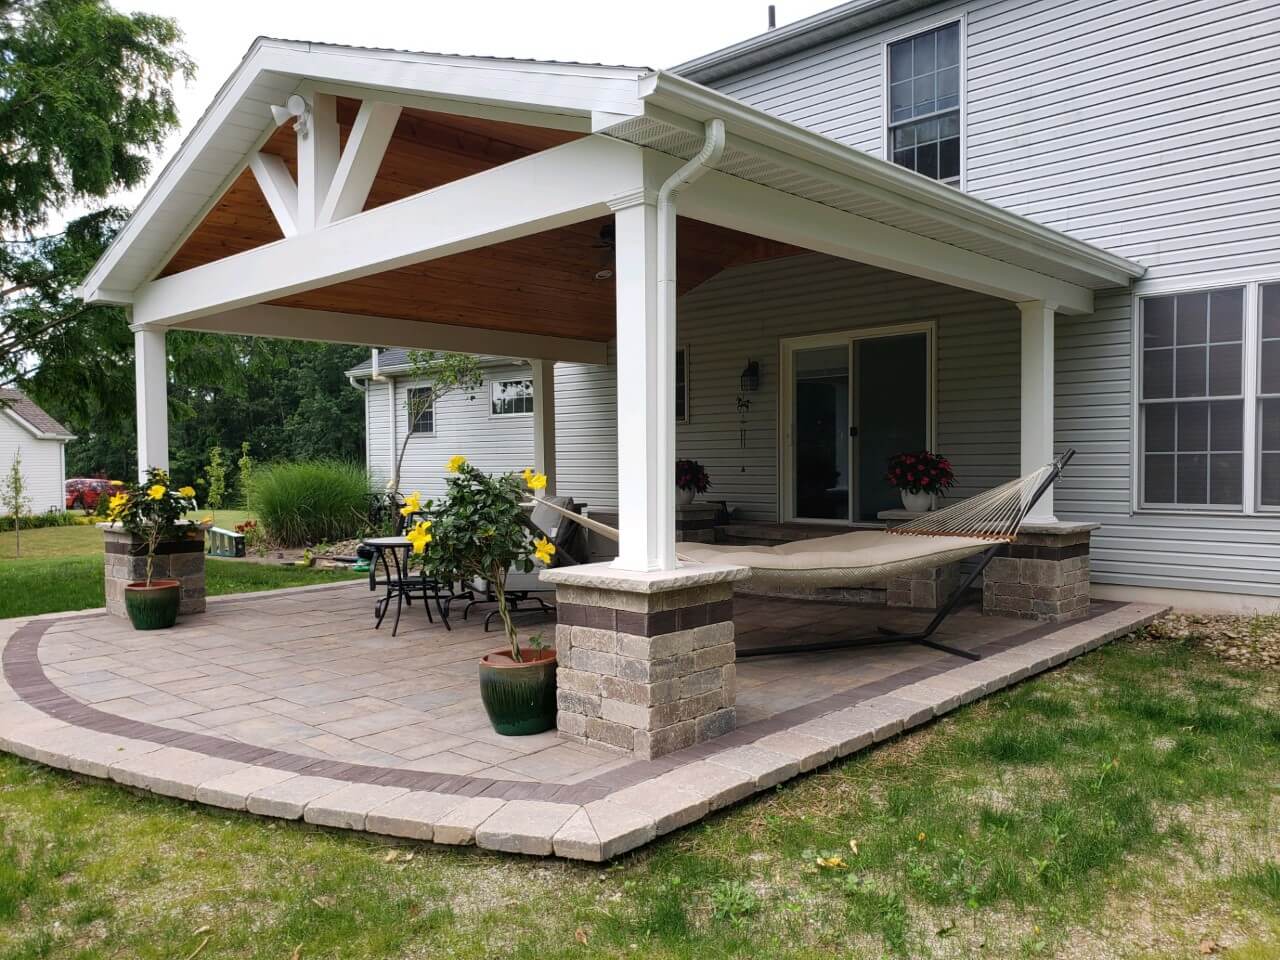 Covered porch with stone columns